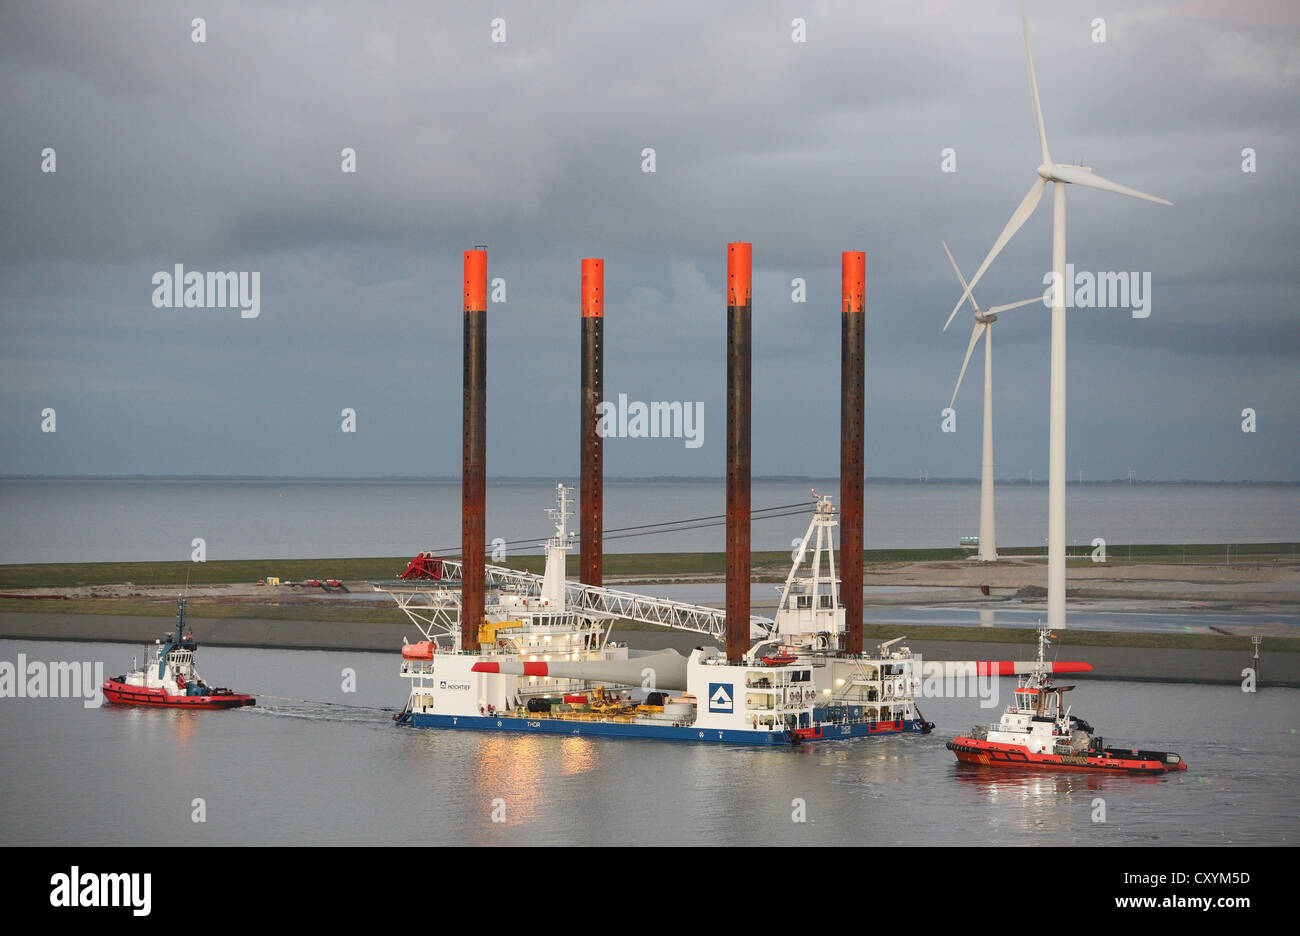 Ship used for the construction of offshore windfarms leaves Eemshaven carrying a wind turbine head, guided by tug boats. Stock Photo